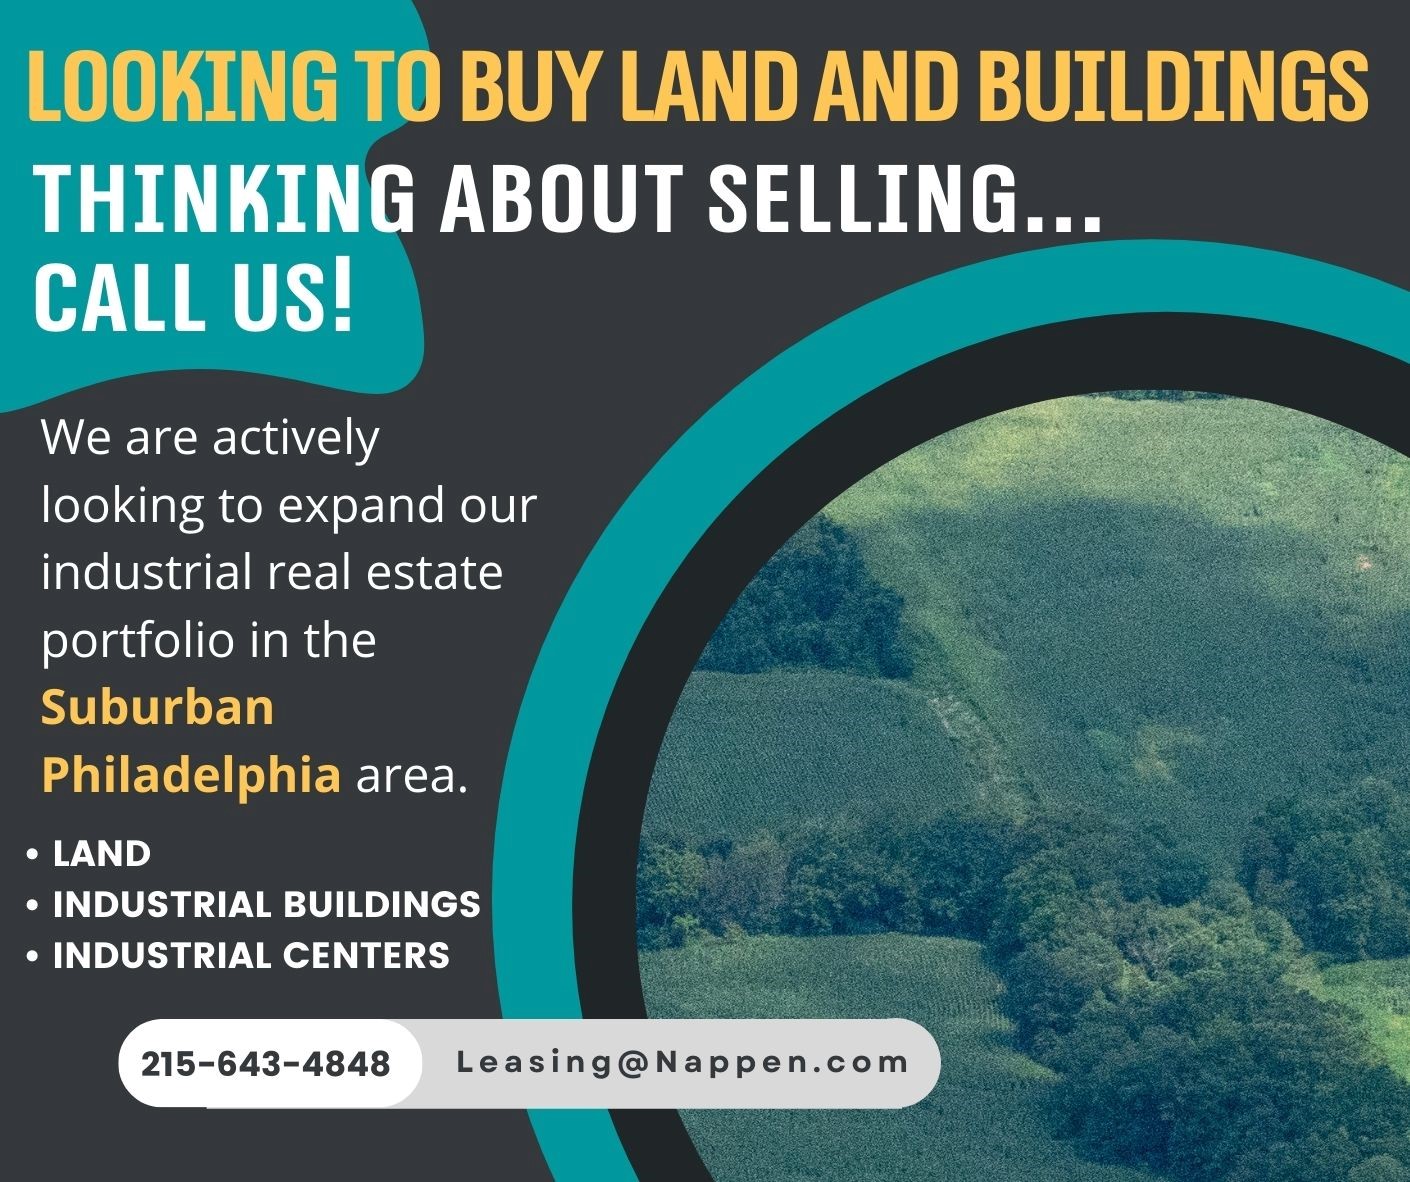 Looking to buy land and buildings, thinking about selling...call us!